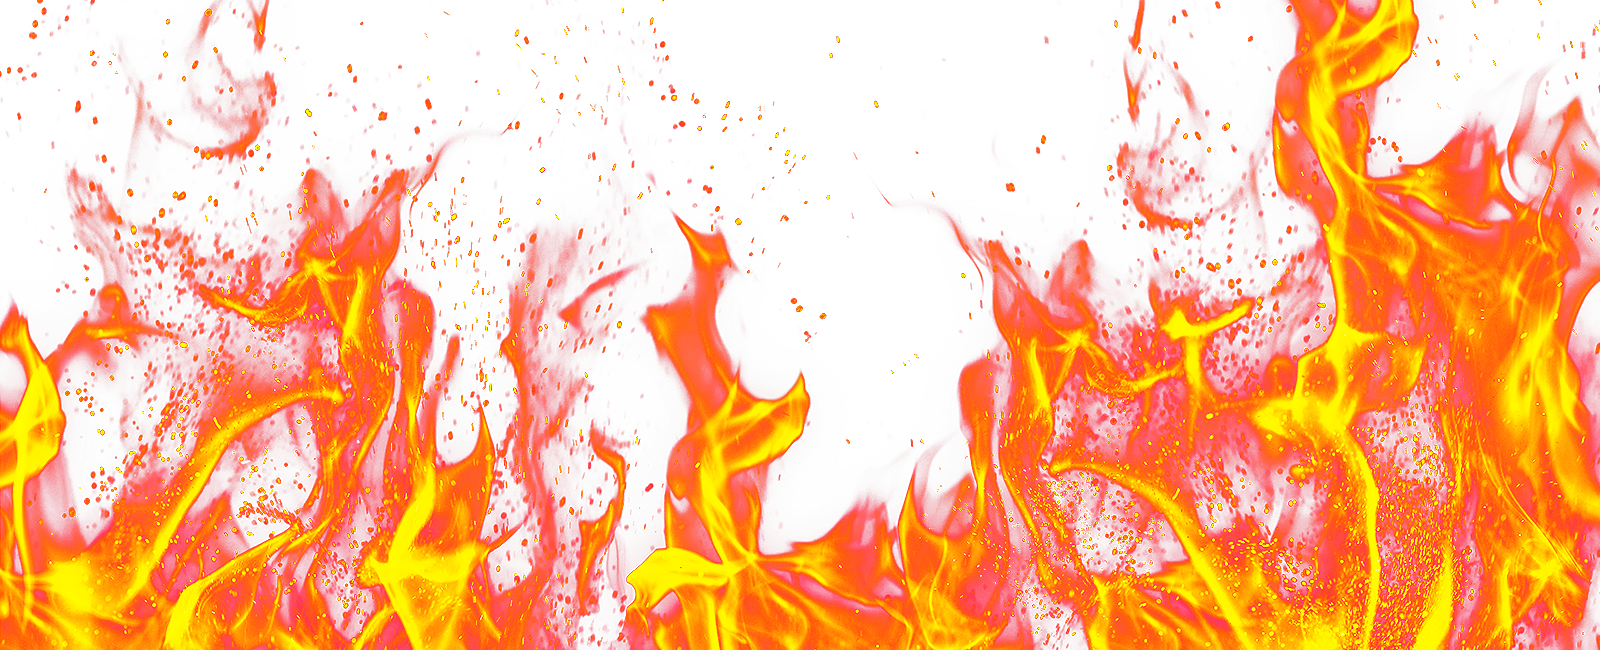 Fire Flame - Fire PNG image png download - 1600*650 - Free Transparent Fire  png Download. - Clip Art Library